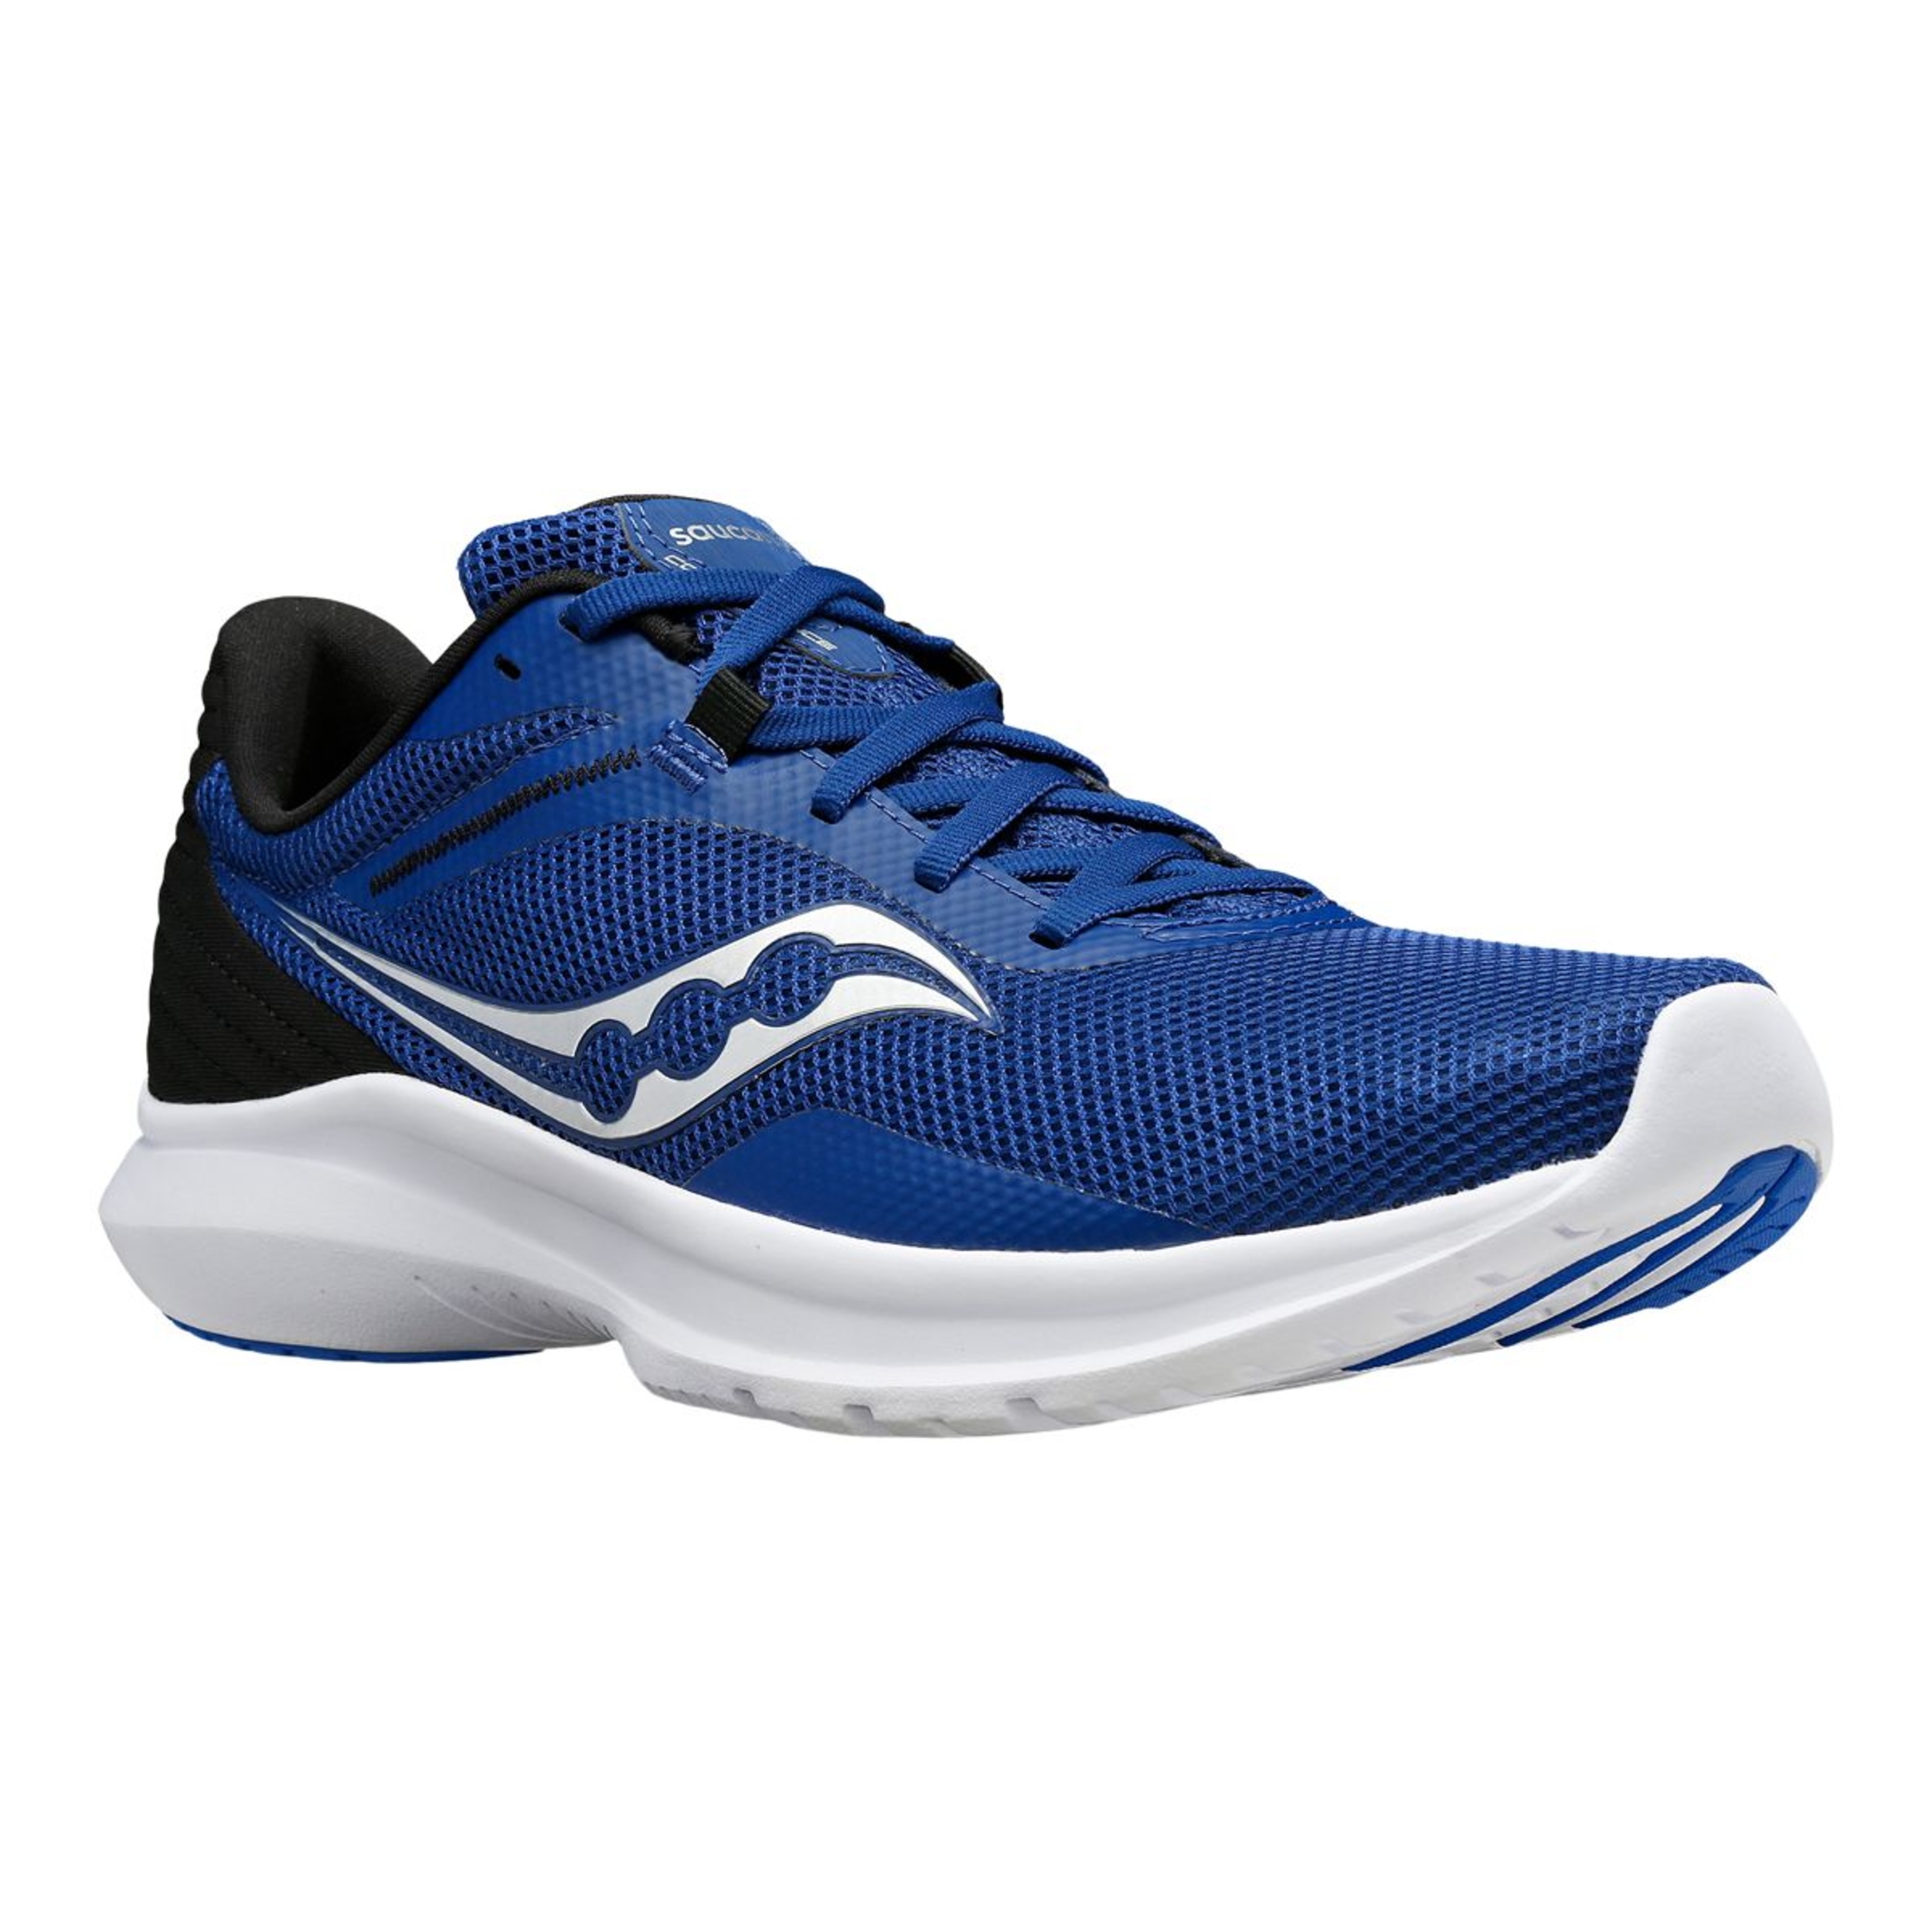 Saucony Men's Convergence Running Shoes | Atmosphere